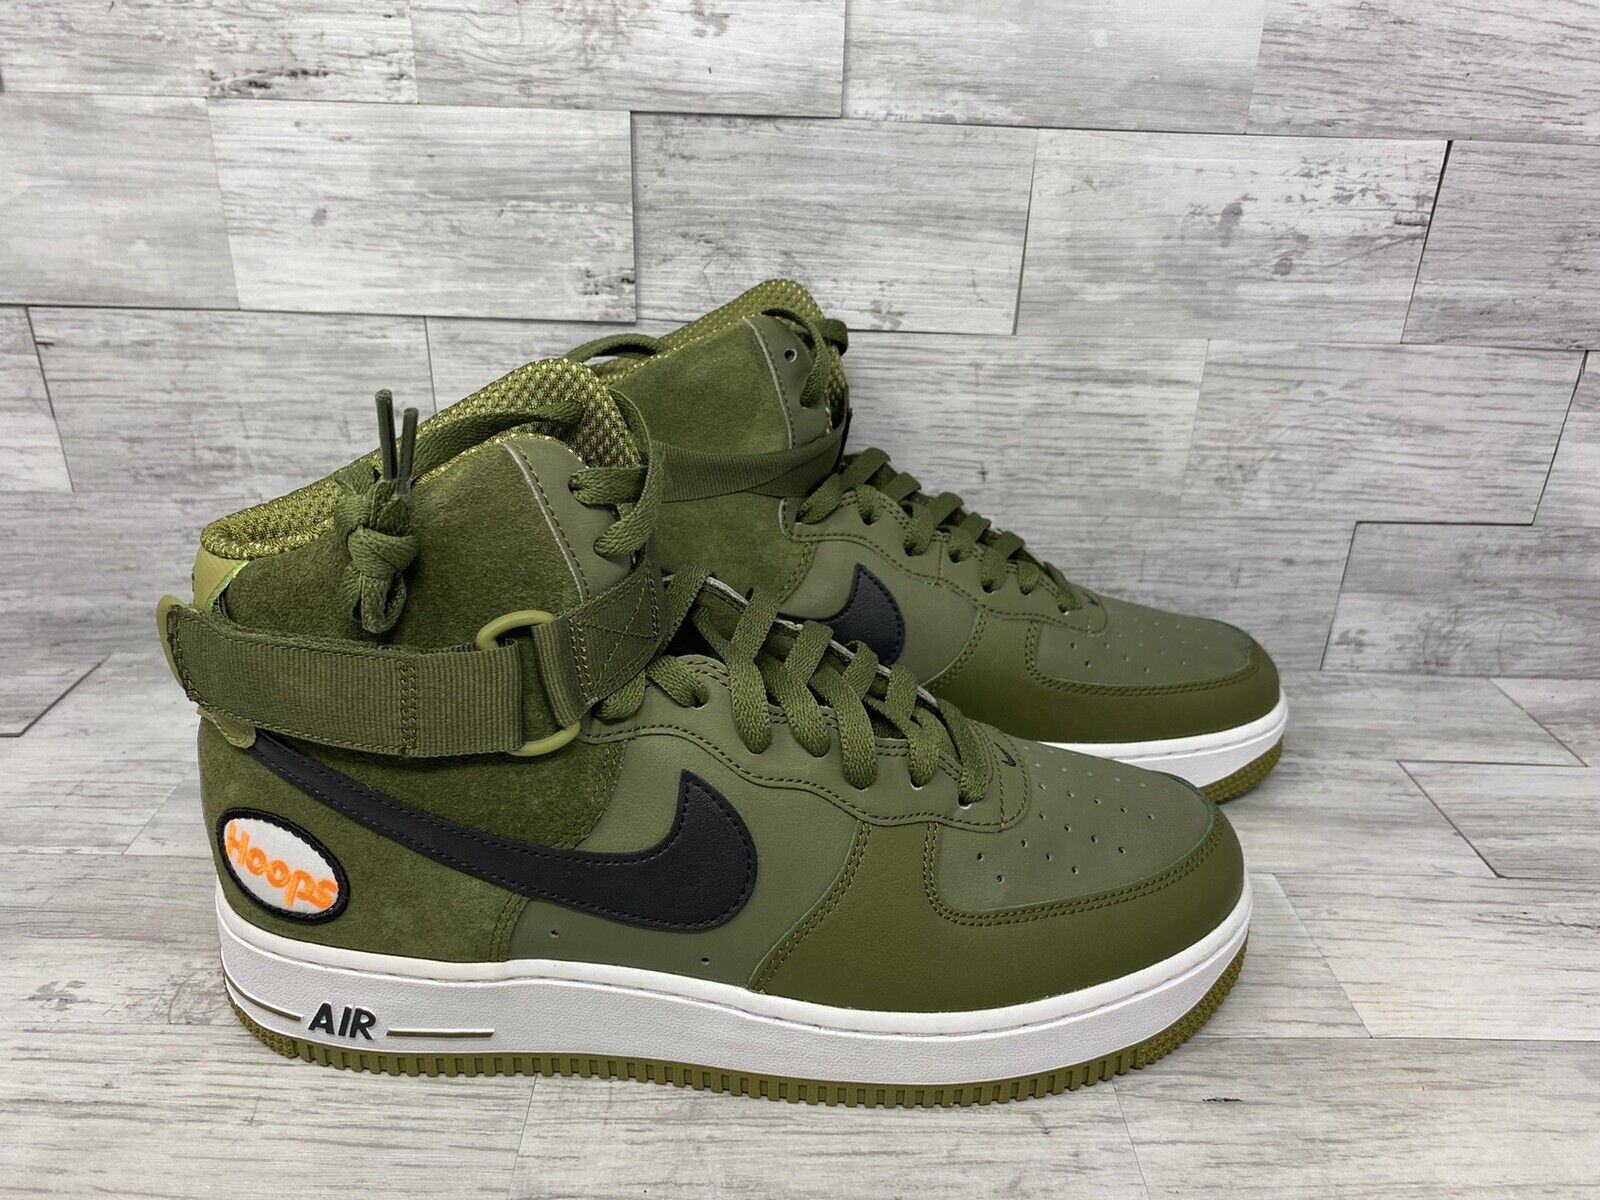 been metro hebzuchtig Nike Air Force 1 High '07 LV8 Hoops Green DH7453 300 Men's Size 9 | eBay